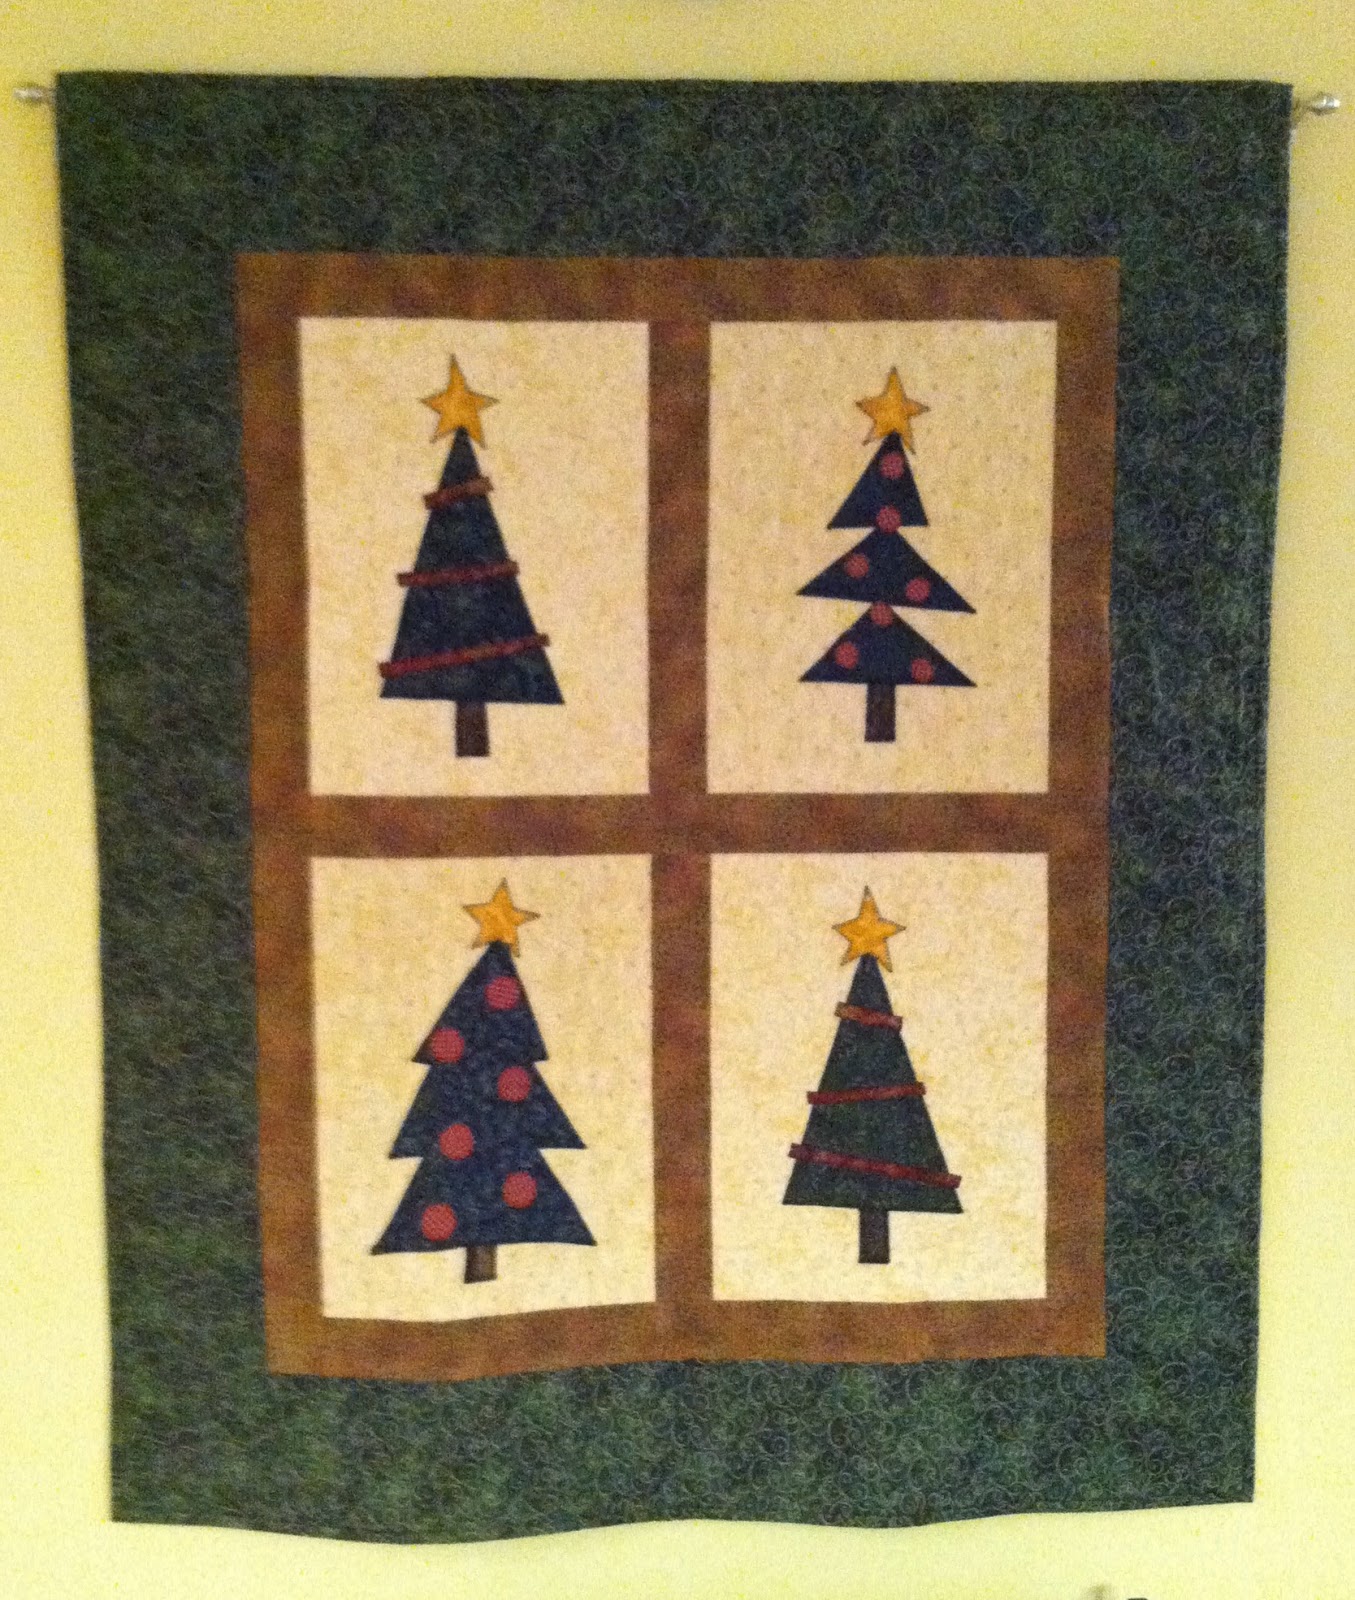 Whimsical Christmas Tree Wall Hanging - Fun and simple way to decorate for Christmas